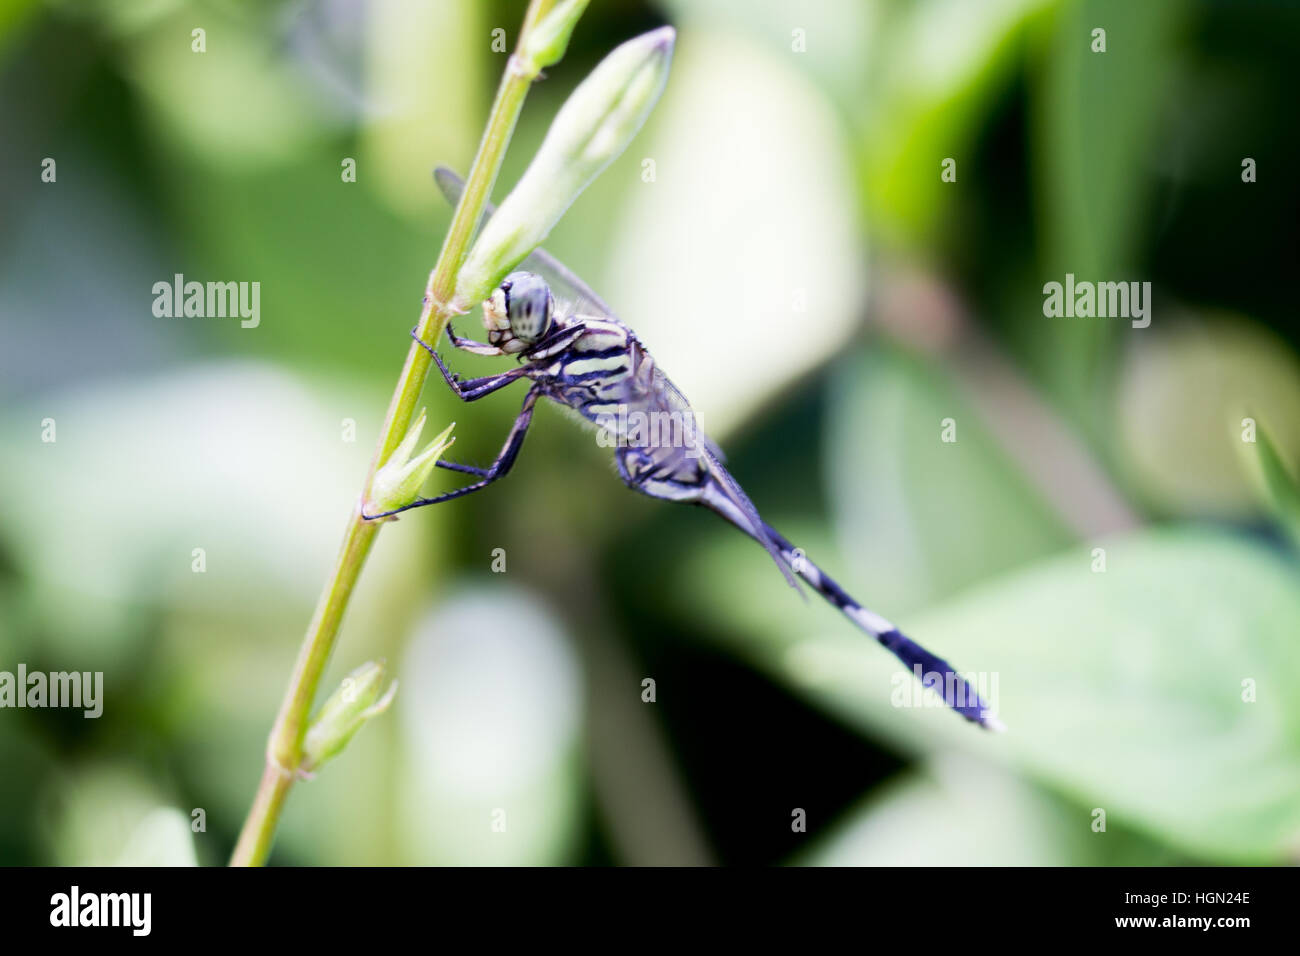 Dragonfly perched by river Stock Photo